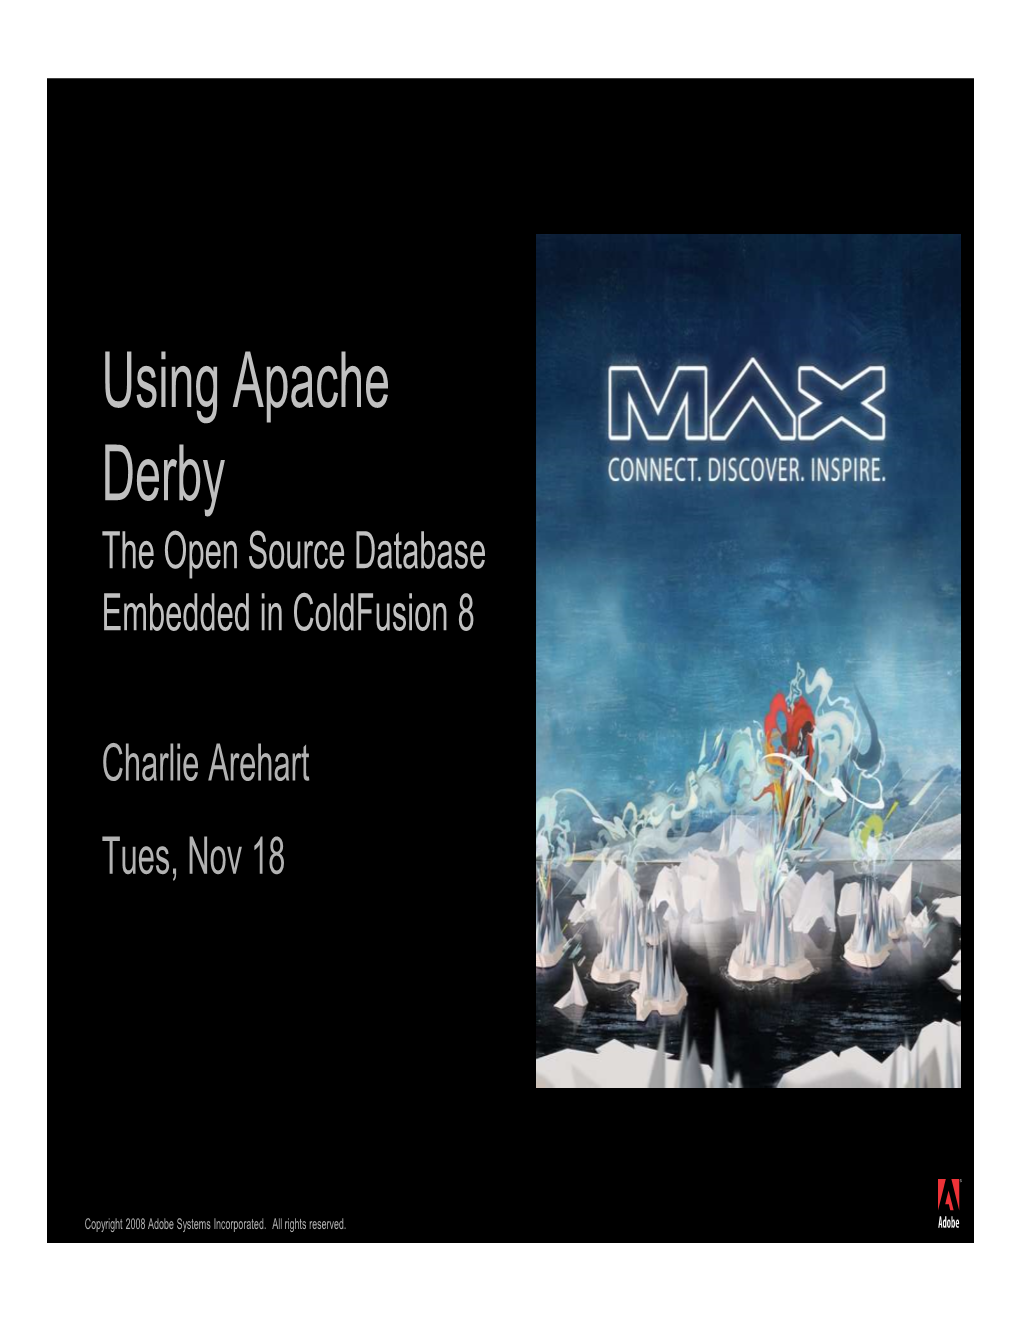 Using Apache Derby the Open Source Database Embedded in Coldfusion 8